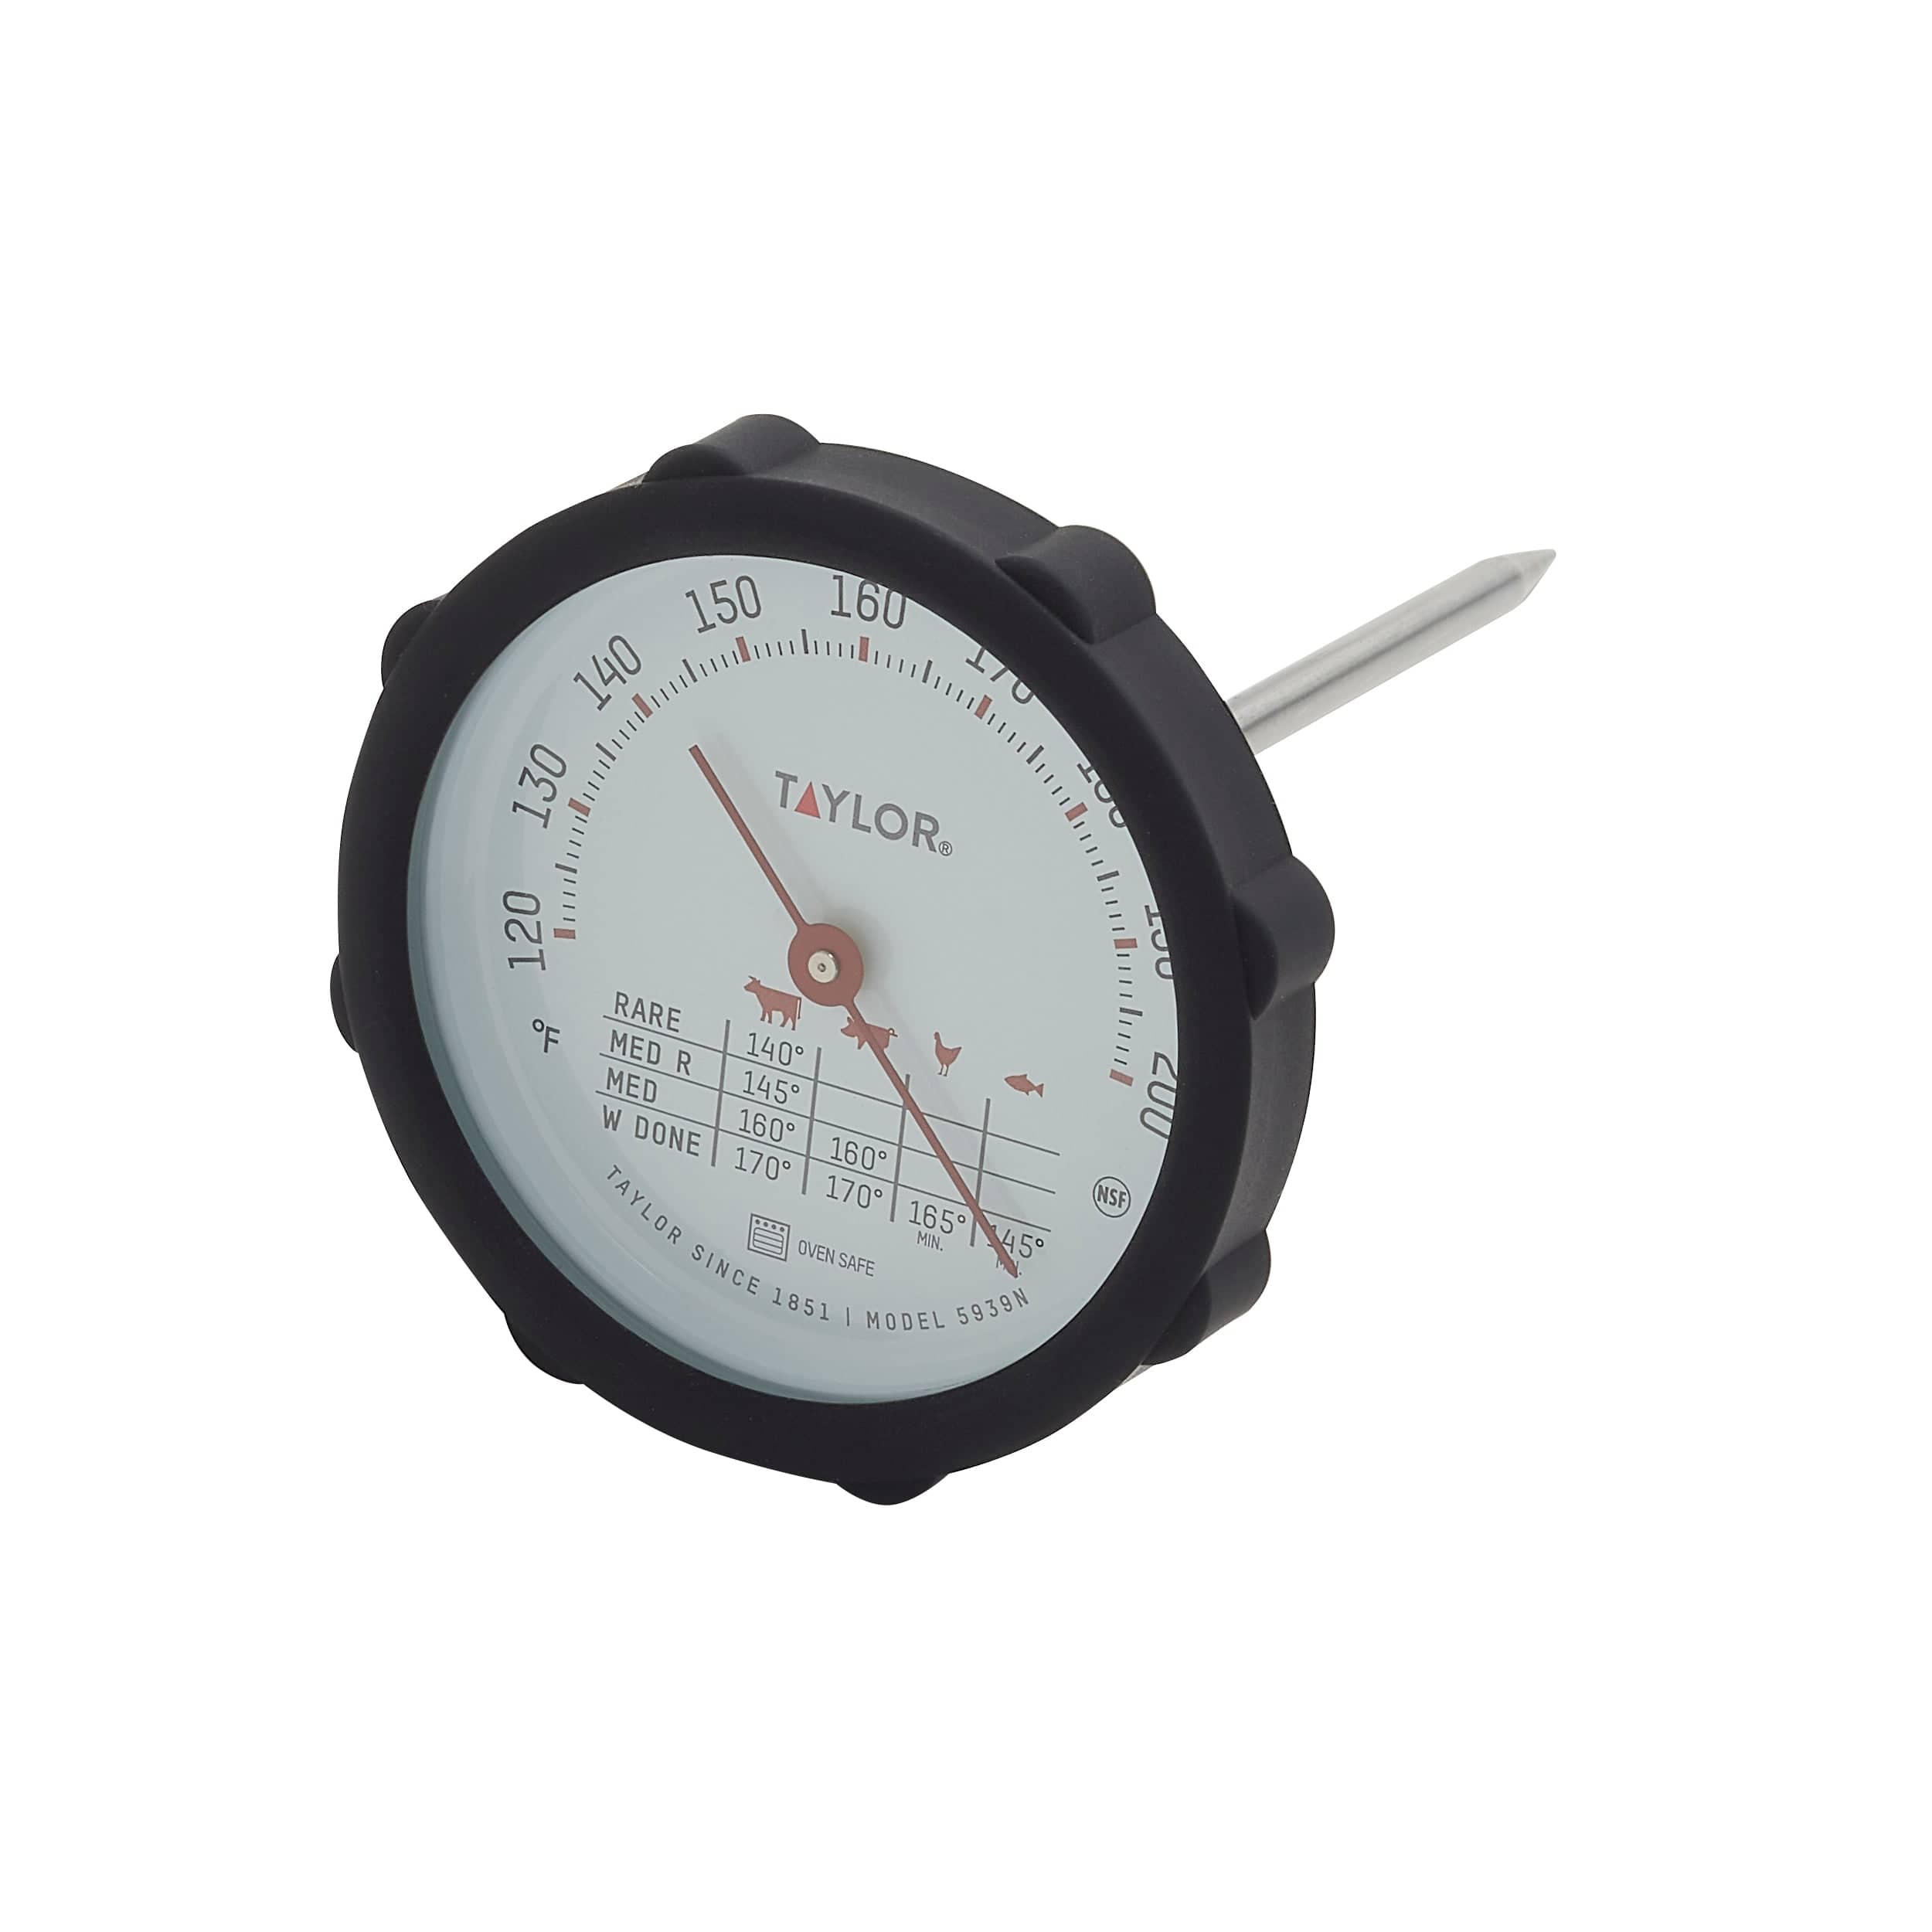 Taylor Oven Safe Leave-In Meat Thermometer